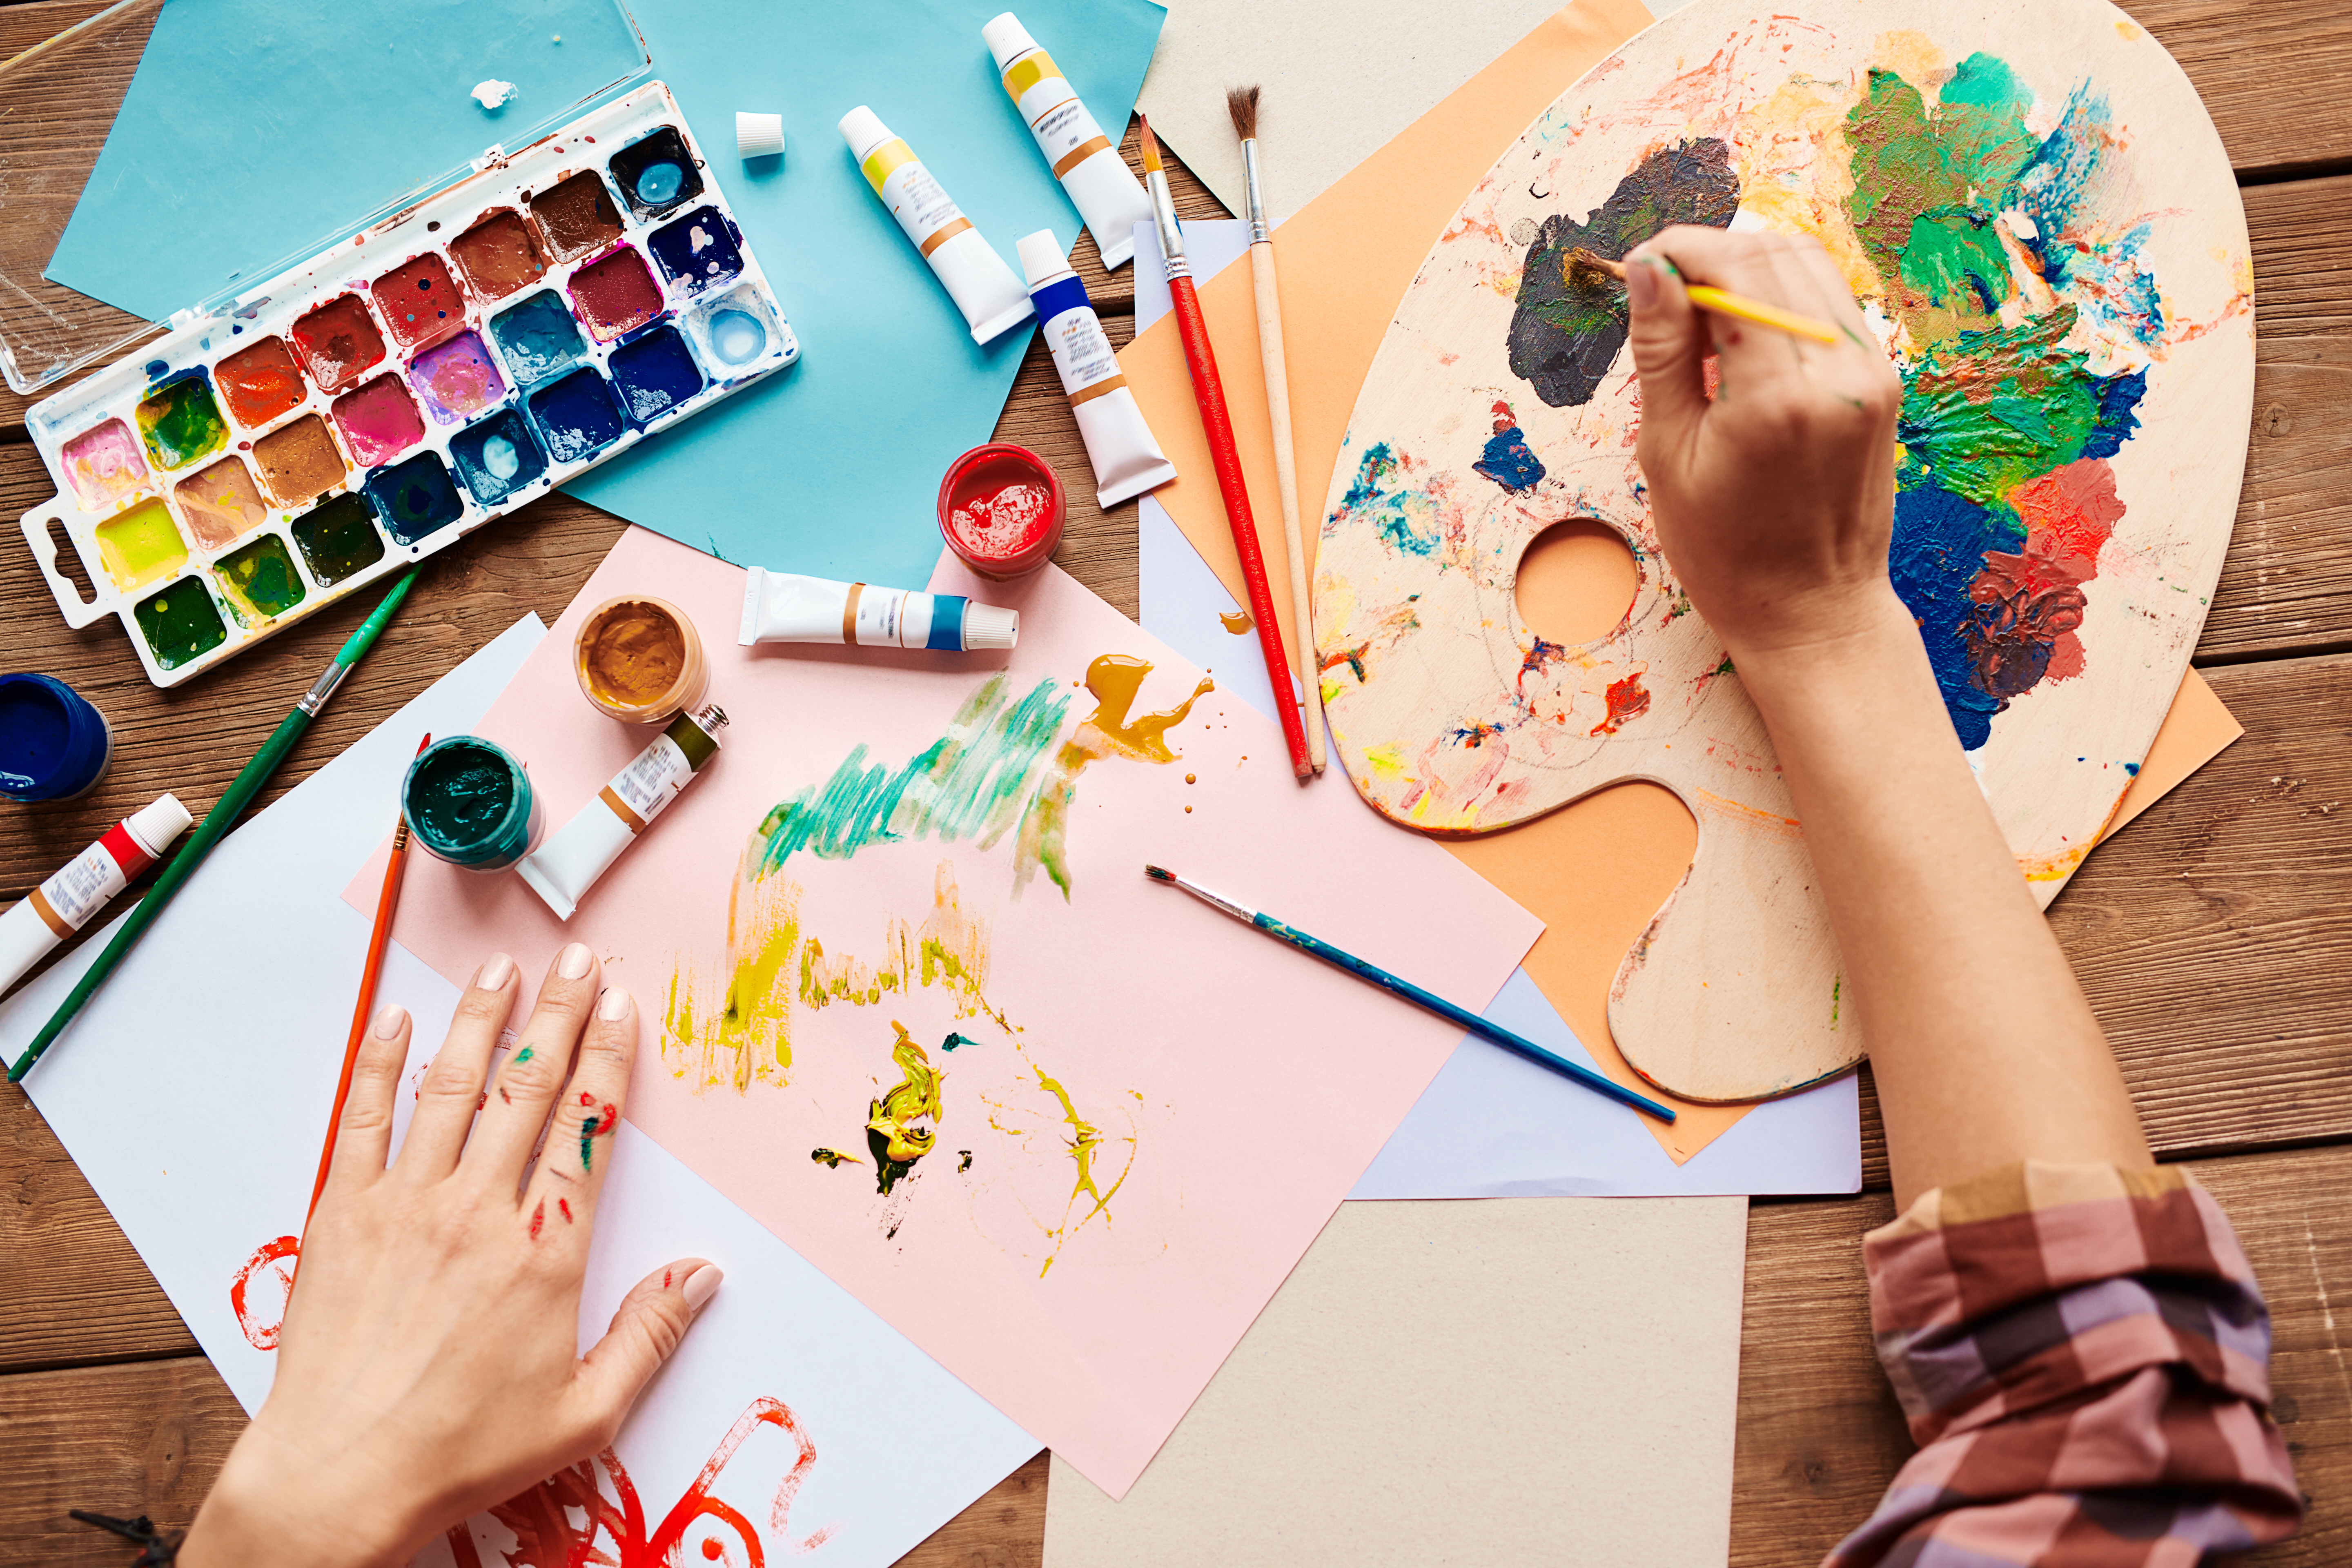 Part 2: The Surprising Advantages and Benefits of Arts Education for Children, Teens and Adults